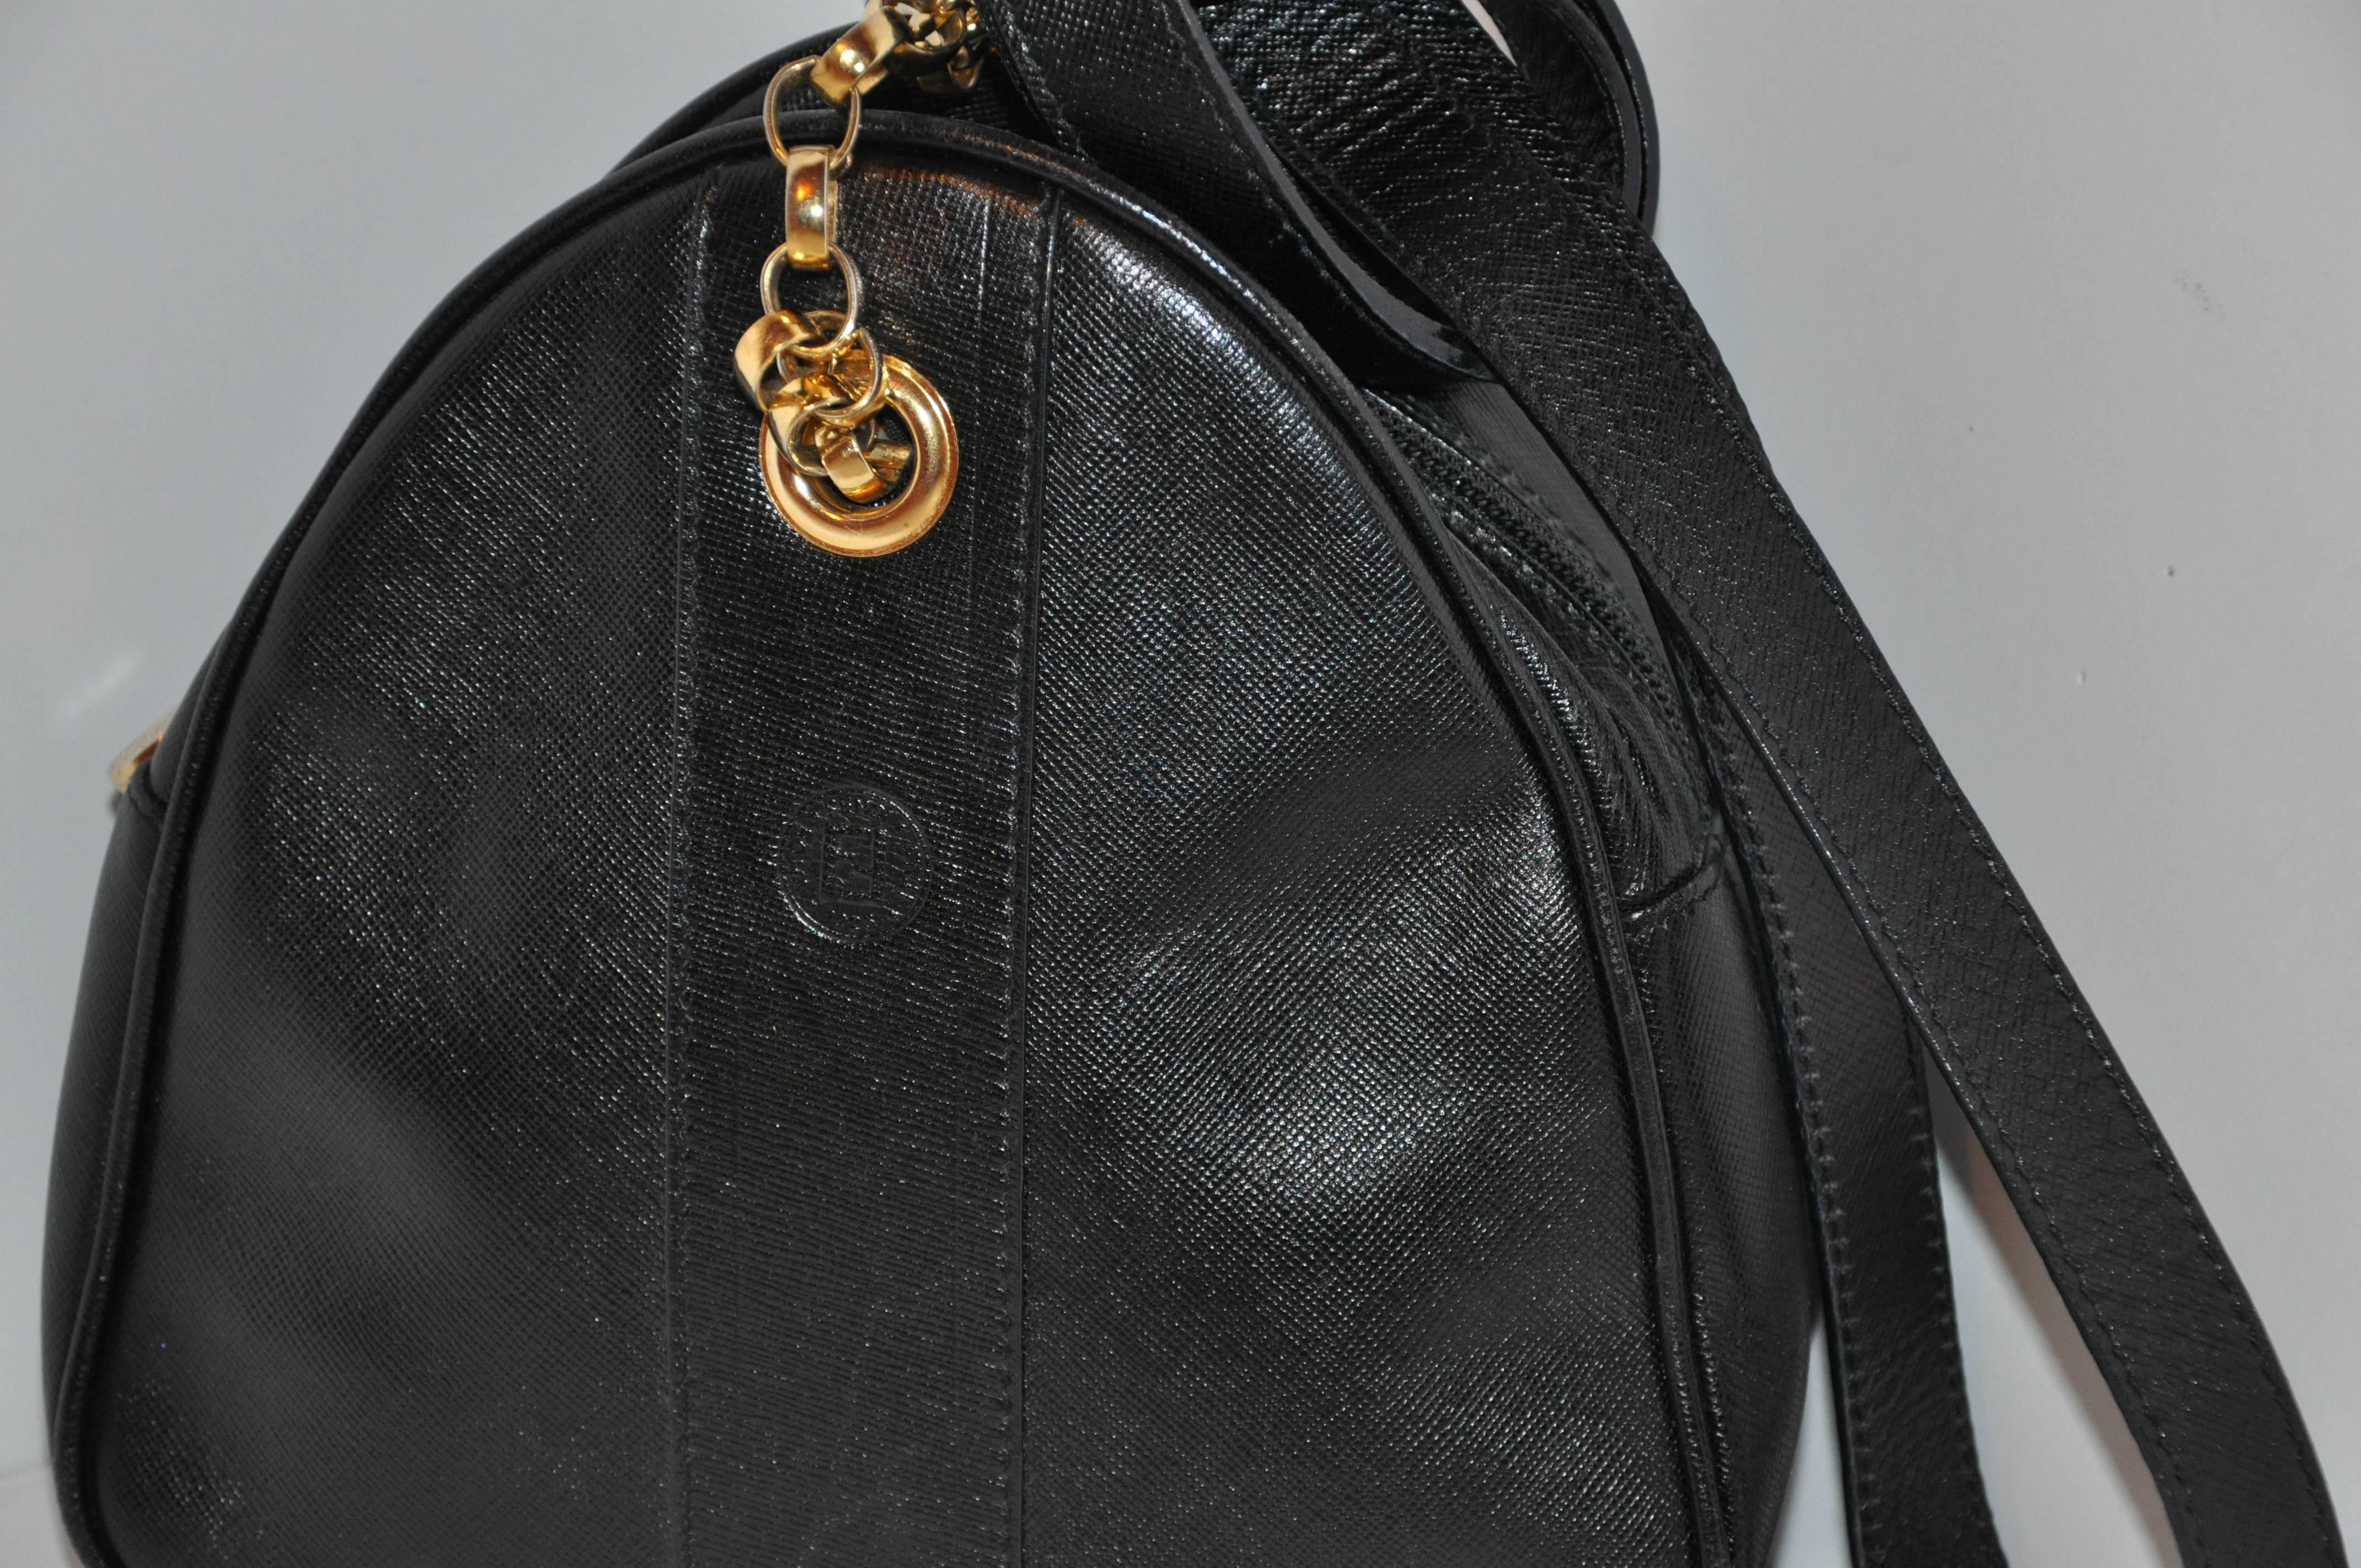         Fendi black textured calfskin leather small shoulder bag is accented with gilded gold hardware on the straps, eyelet and zipper's tab. Their signature name logo is located on the front-side.
        The interior is fully lined and the top